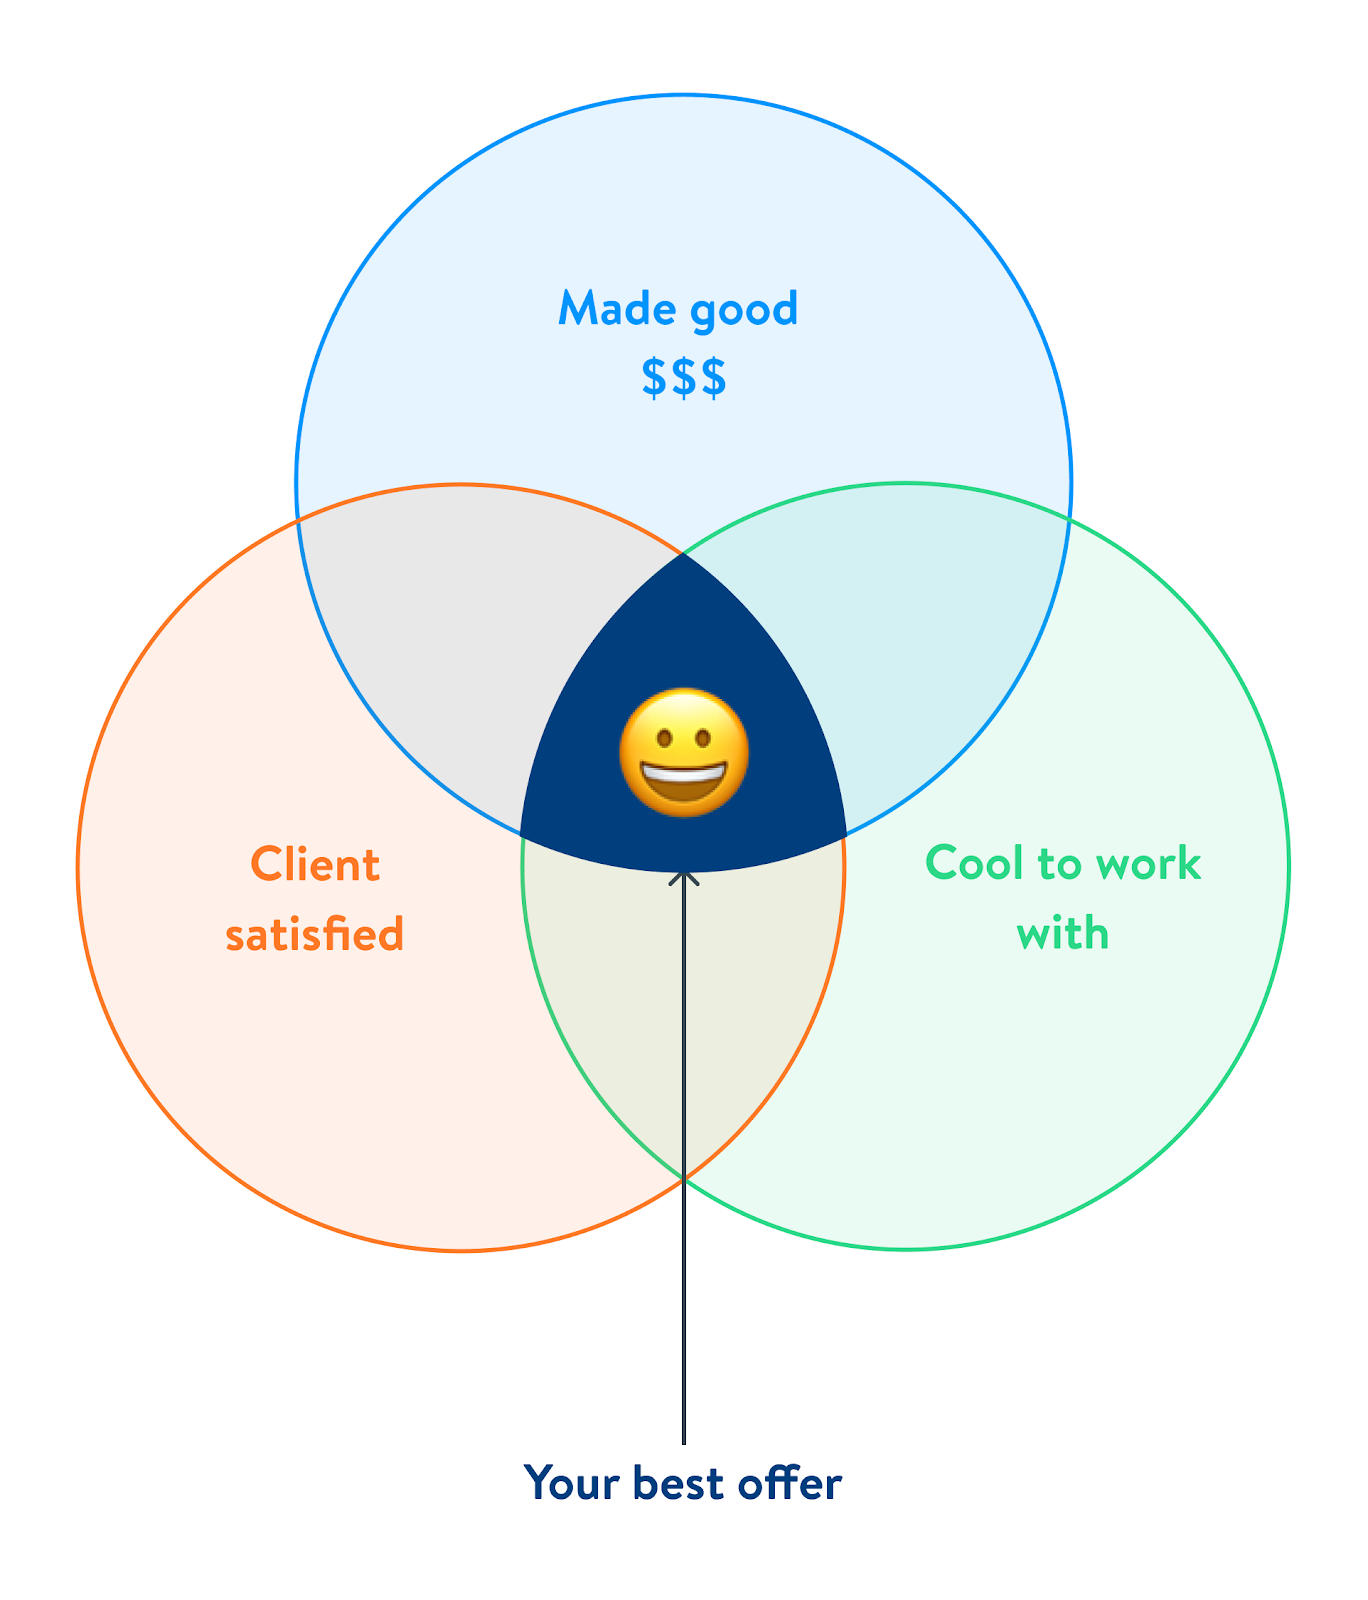 The perfect clientele is a trifecta: (1) Made good money, (2) cool to work with, and (3) client was satisfied.